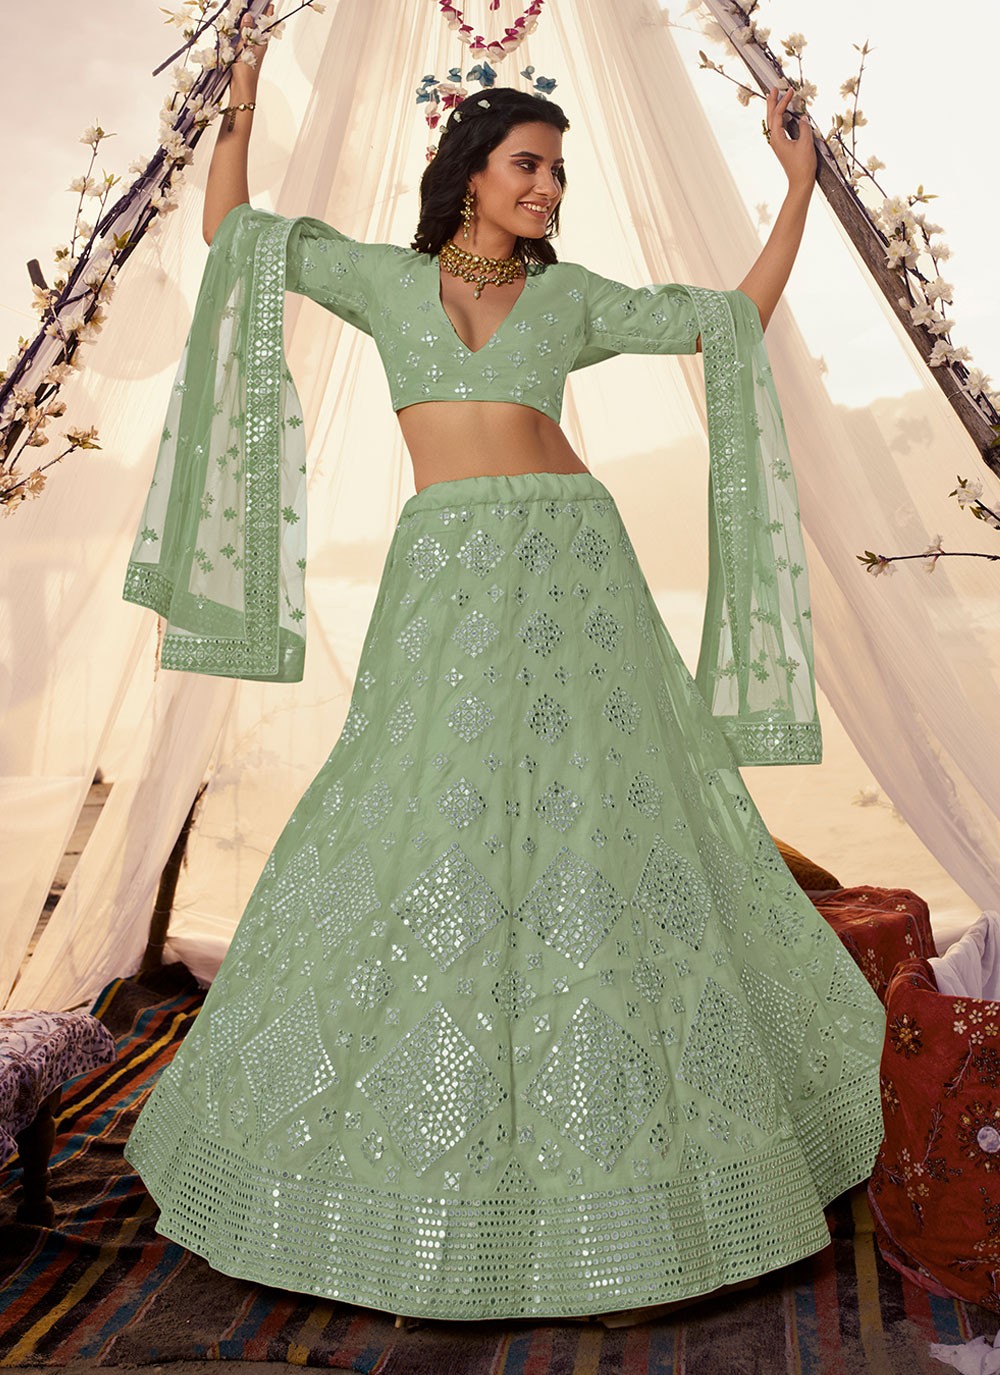 9 Styling Tips On How to Wear a Lehenga - FotoLog